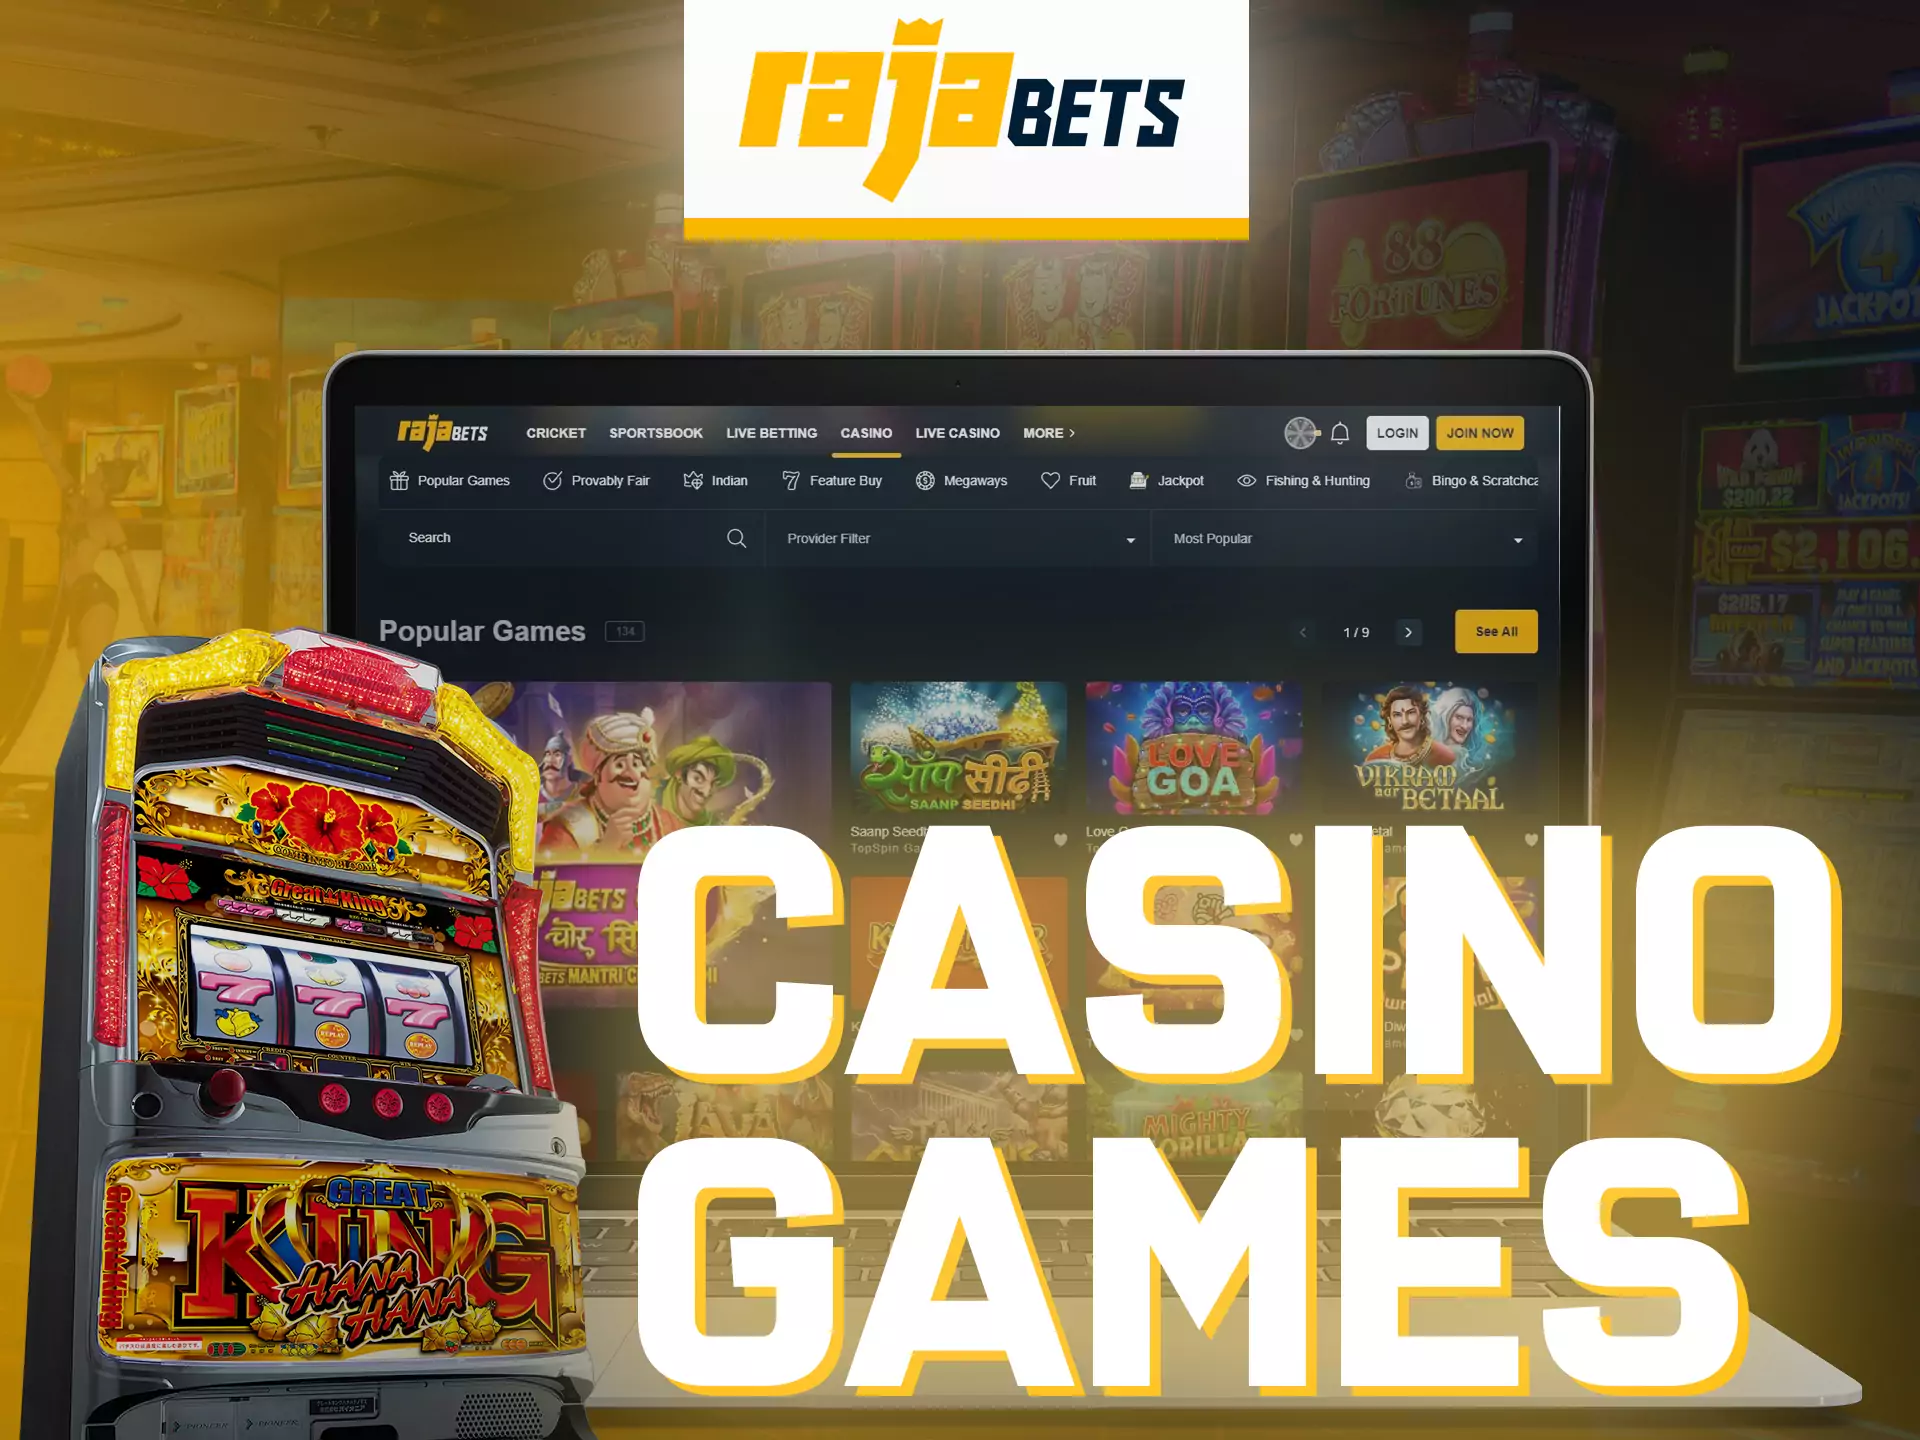 If you're a fan of games, you're sure to find your favorites at Rajabets Casino.